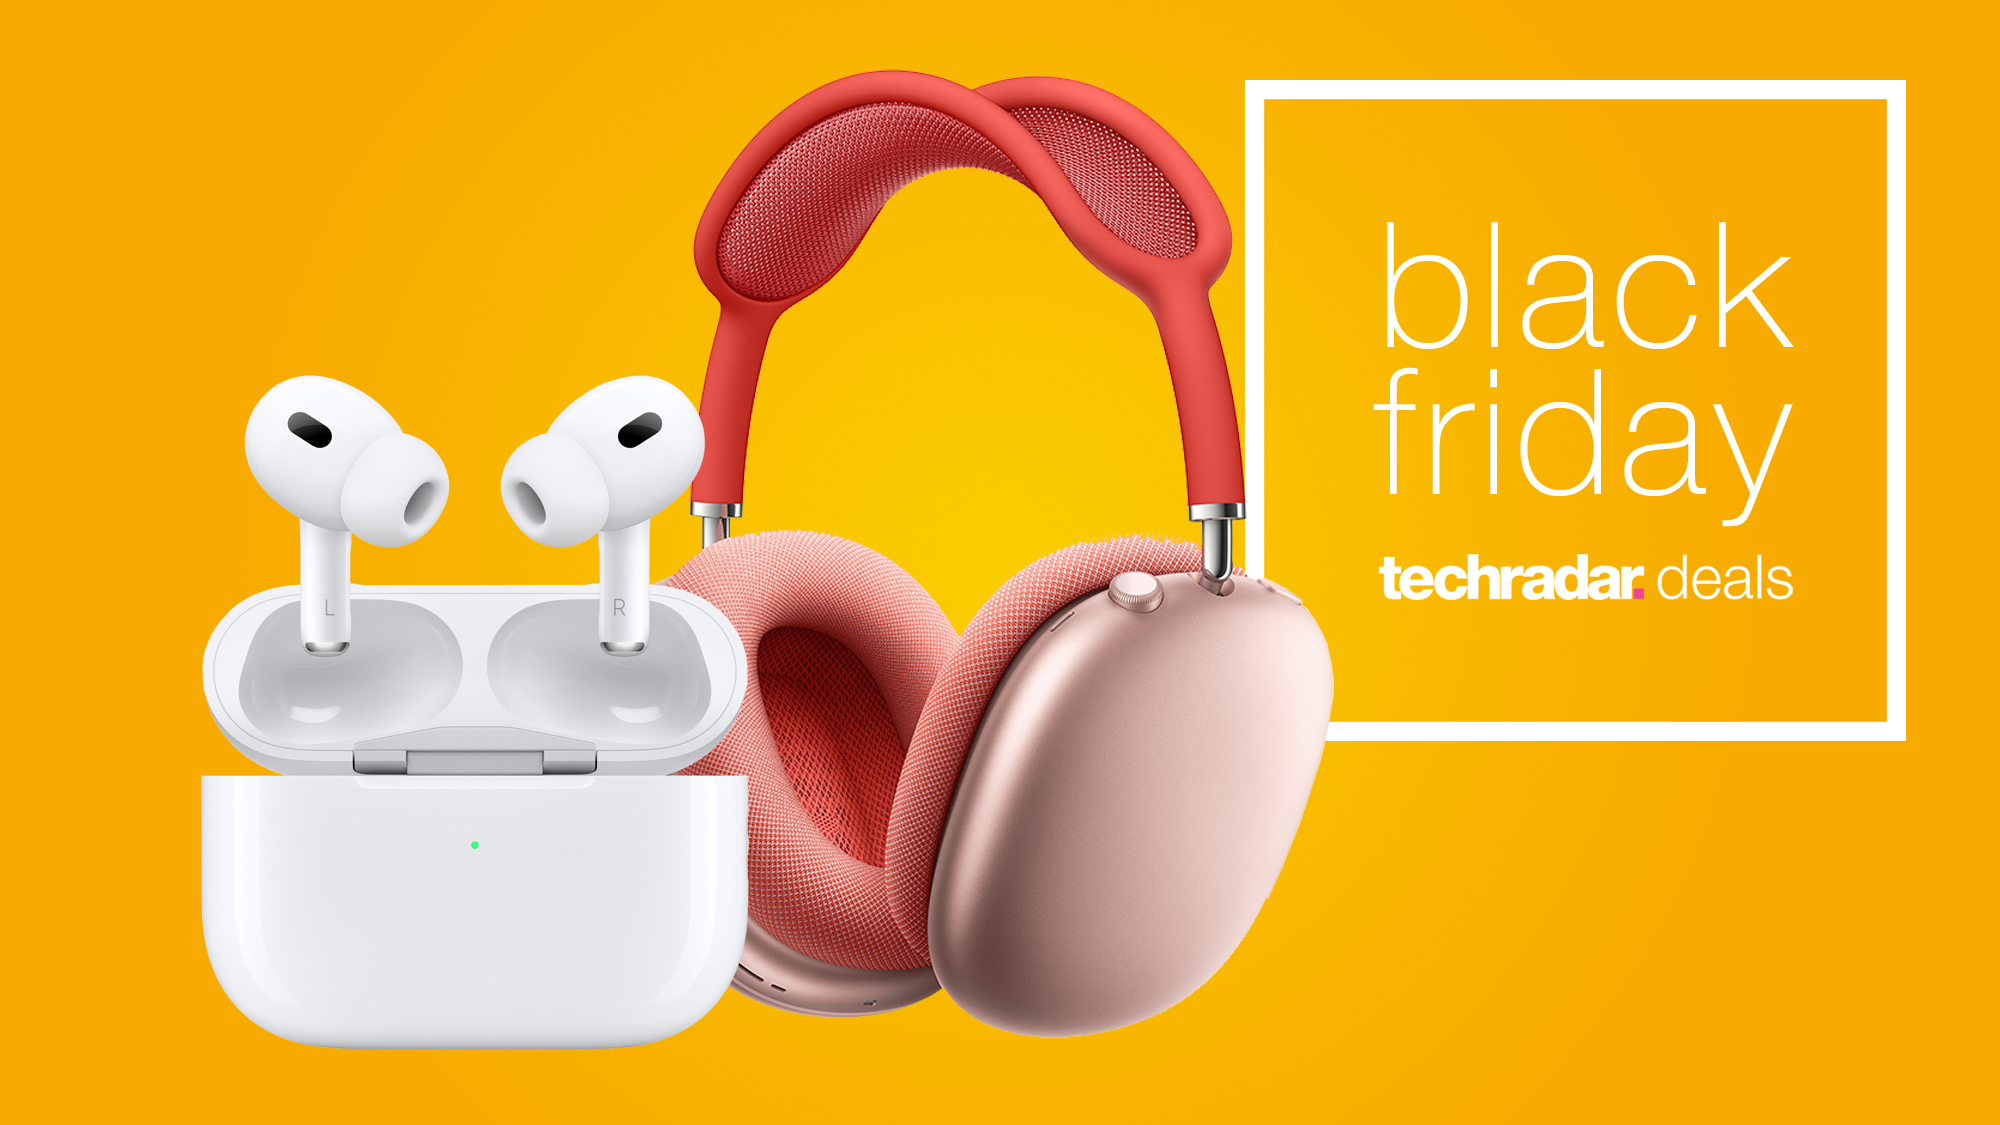 Black Friday Airpods Deals From Amazon, Up To $100 Off